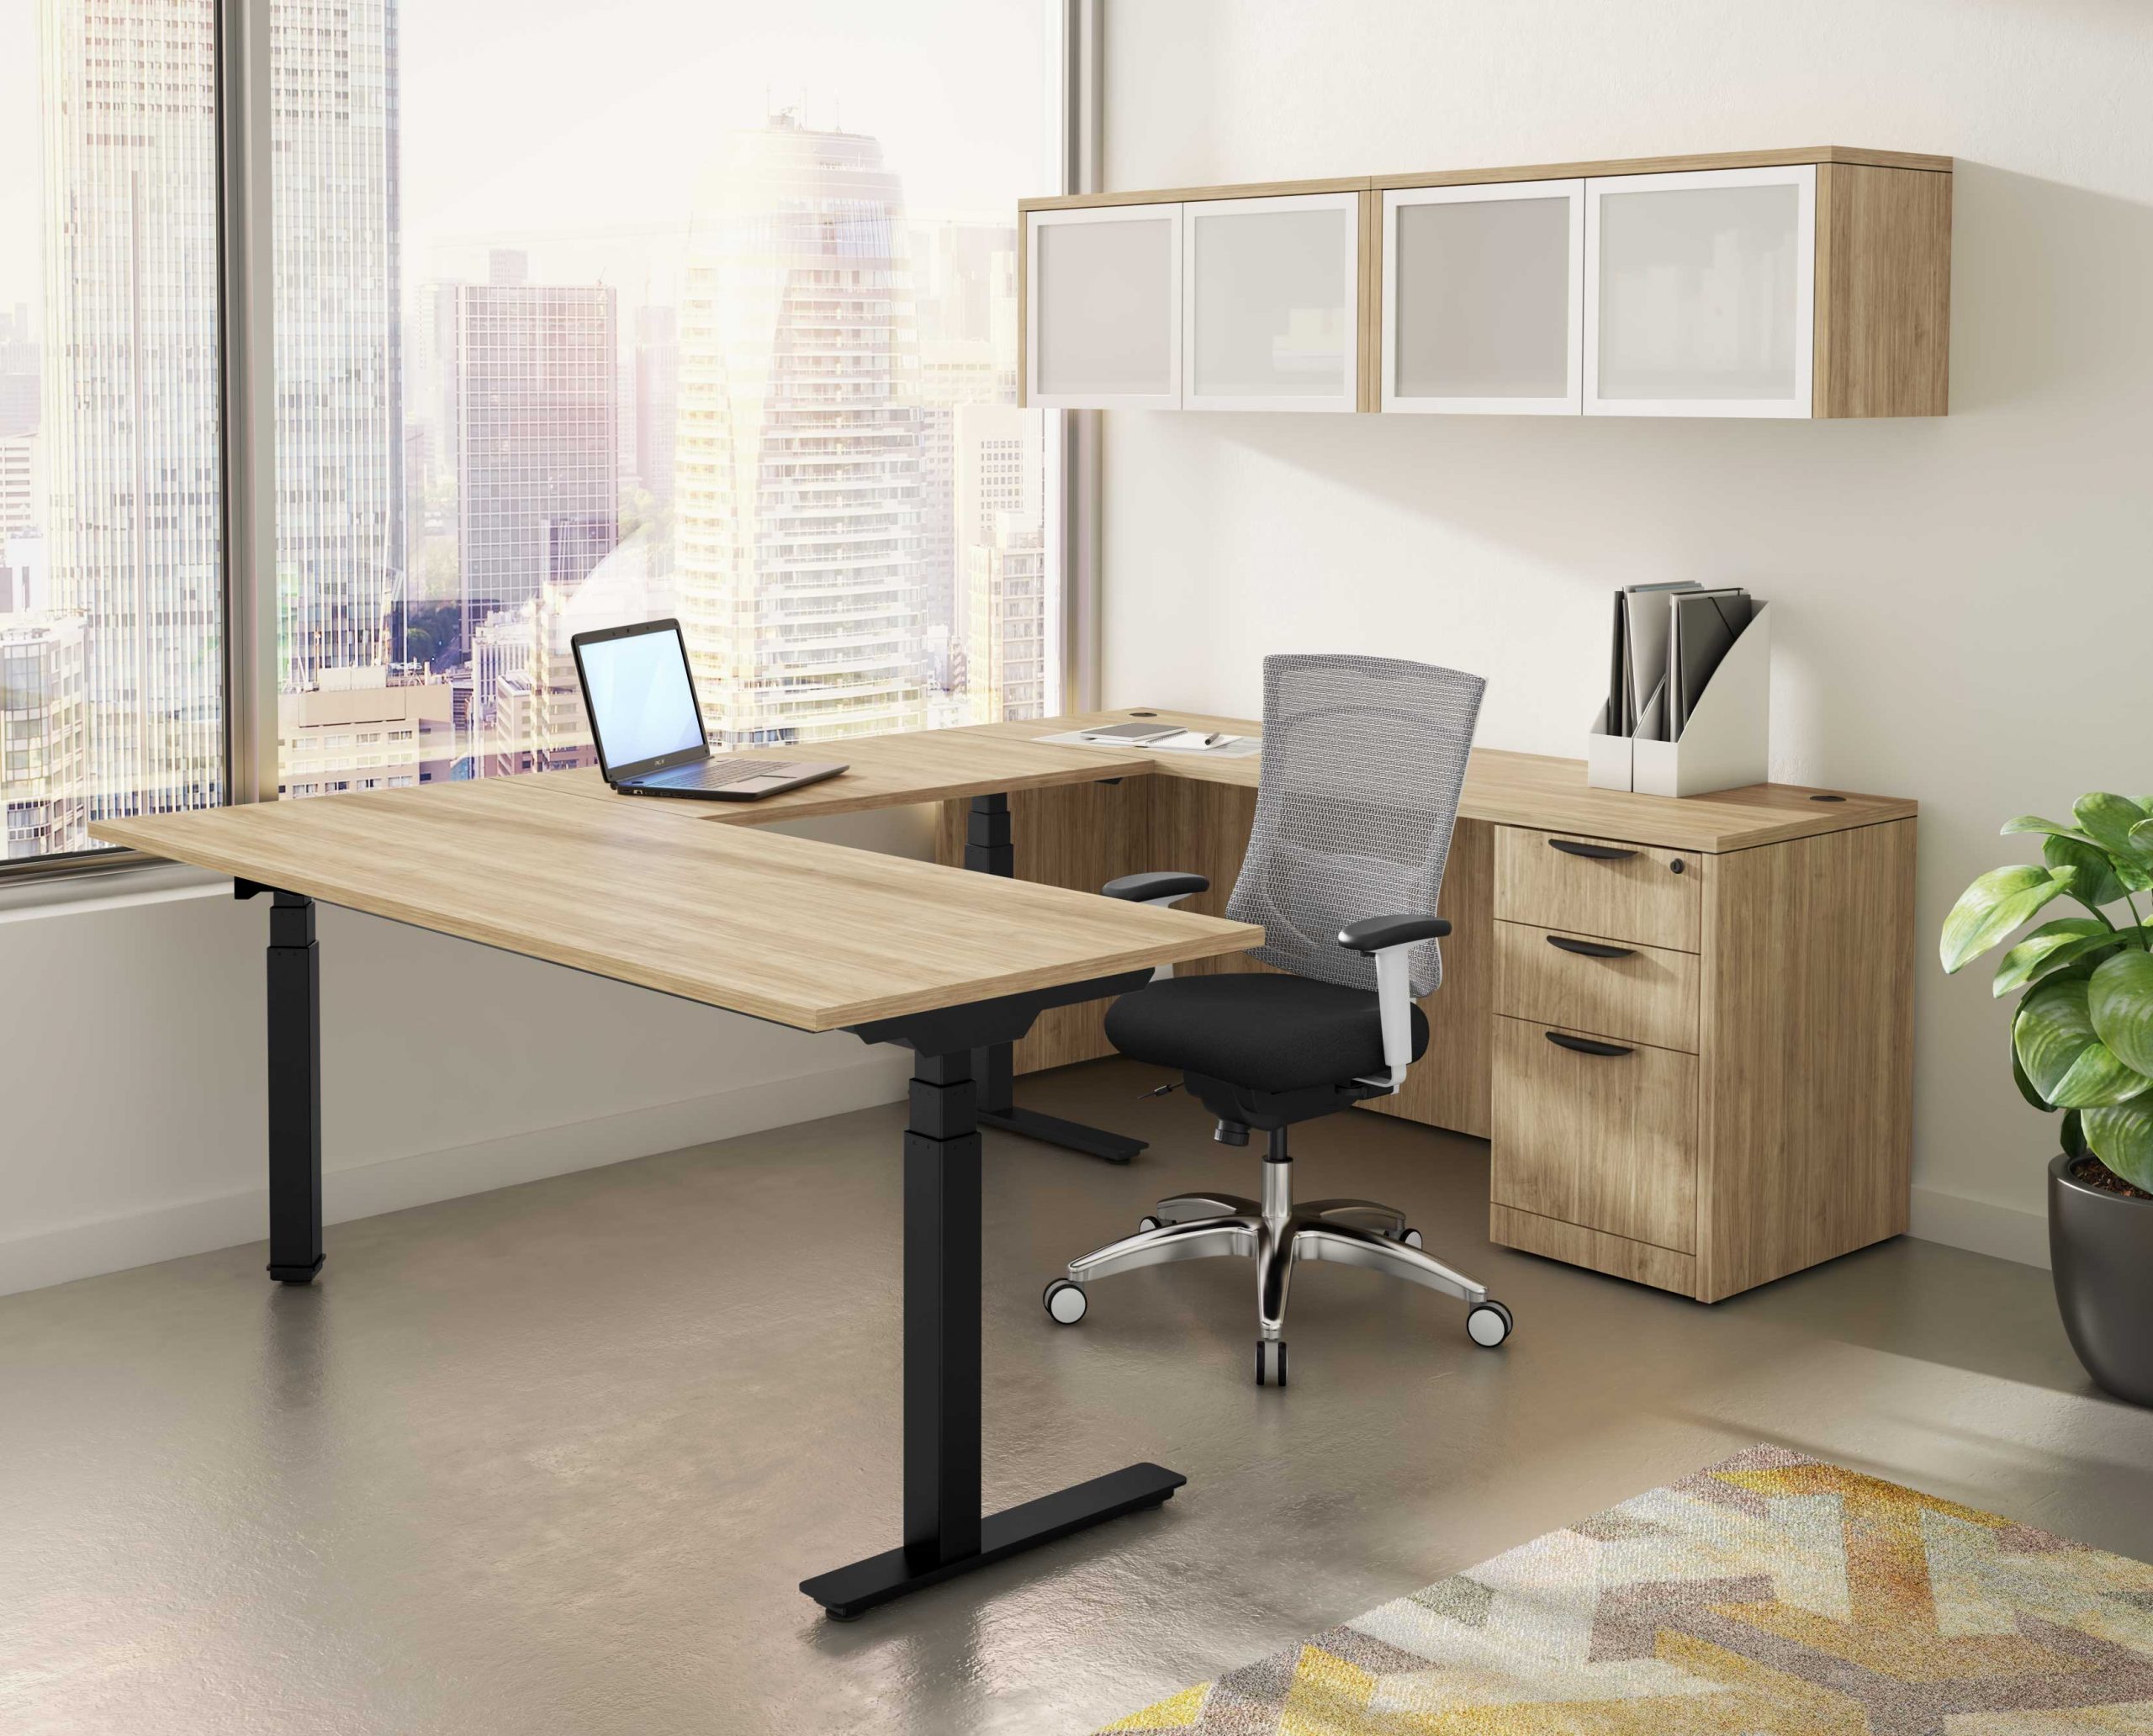 U-Shaped-Standing-Desk-1 Electric Standing Desks: Which Type Is the Right One for Your Home Office?